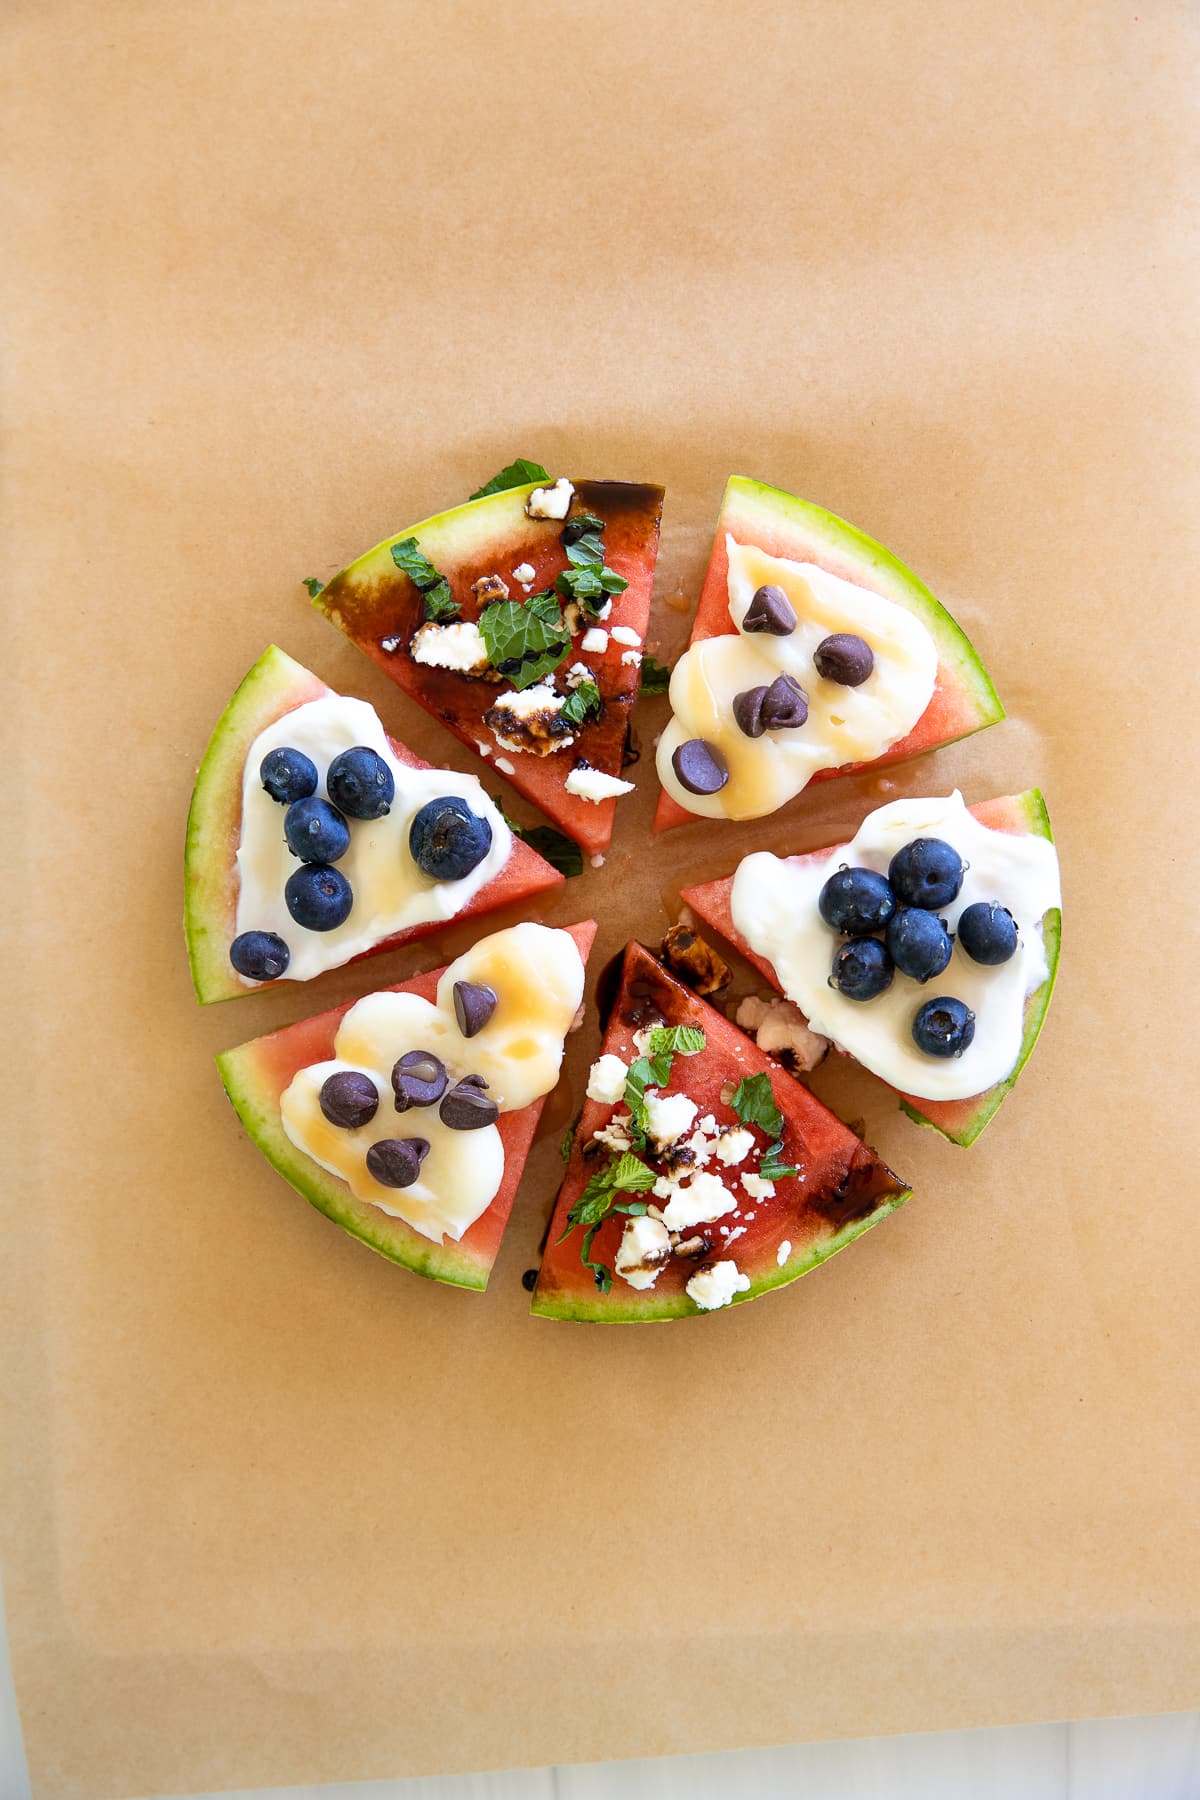 watermelon pizza with a variety of toppings cut into slices.